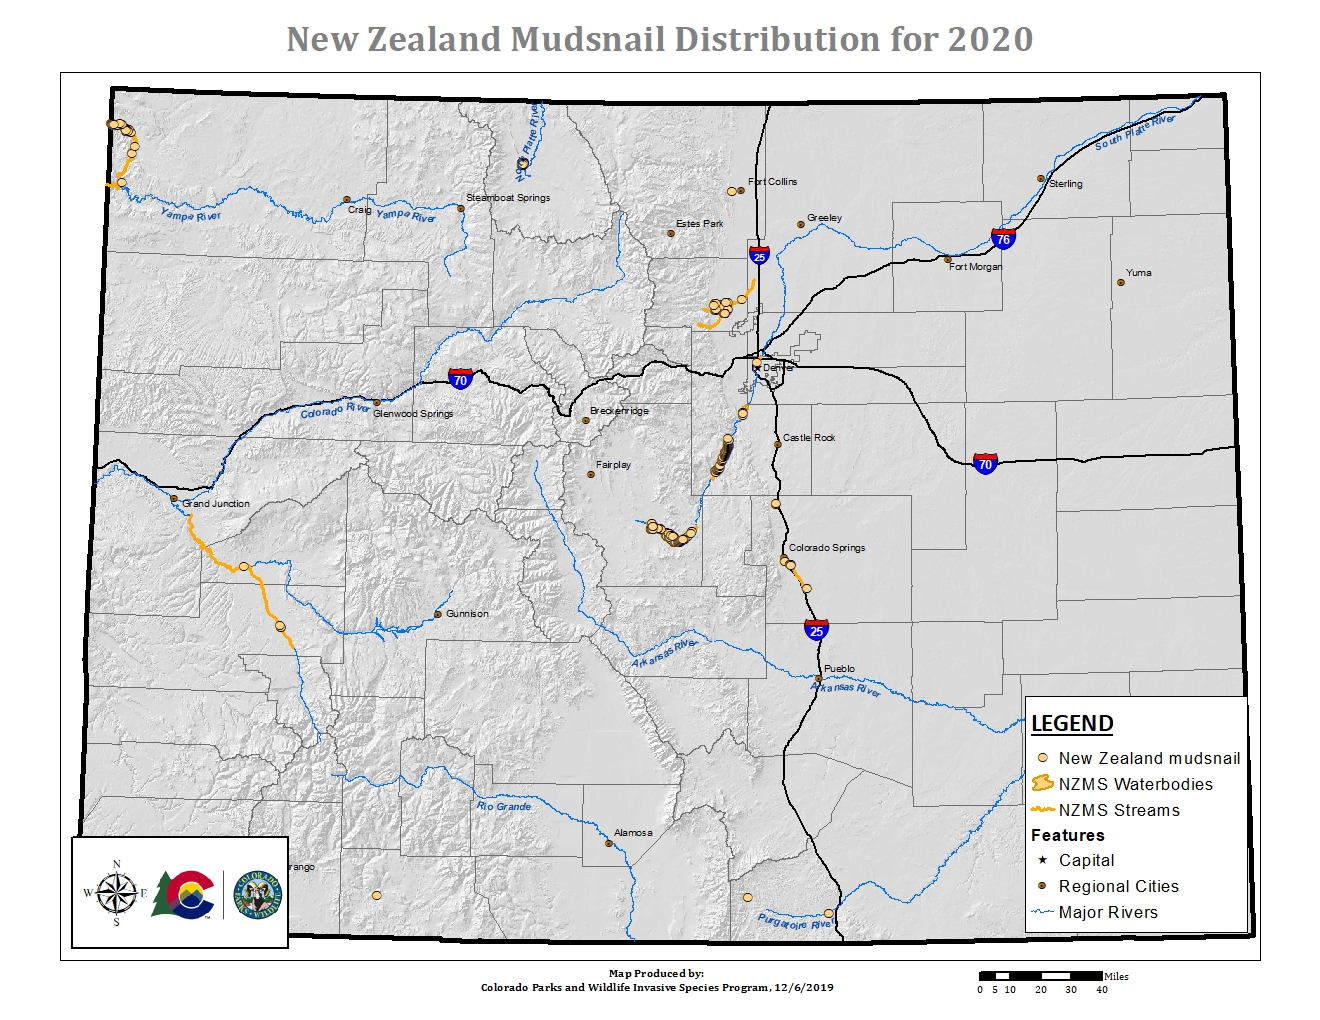 New Zealand Mudsnail Distribution for 2020 Map image